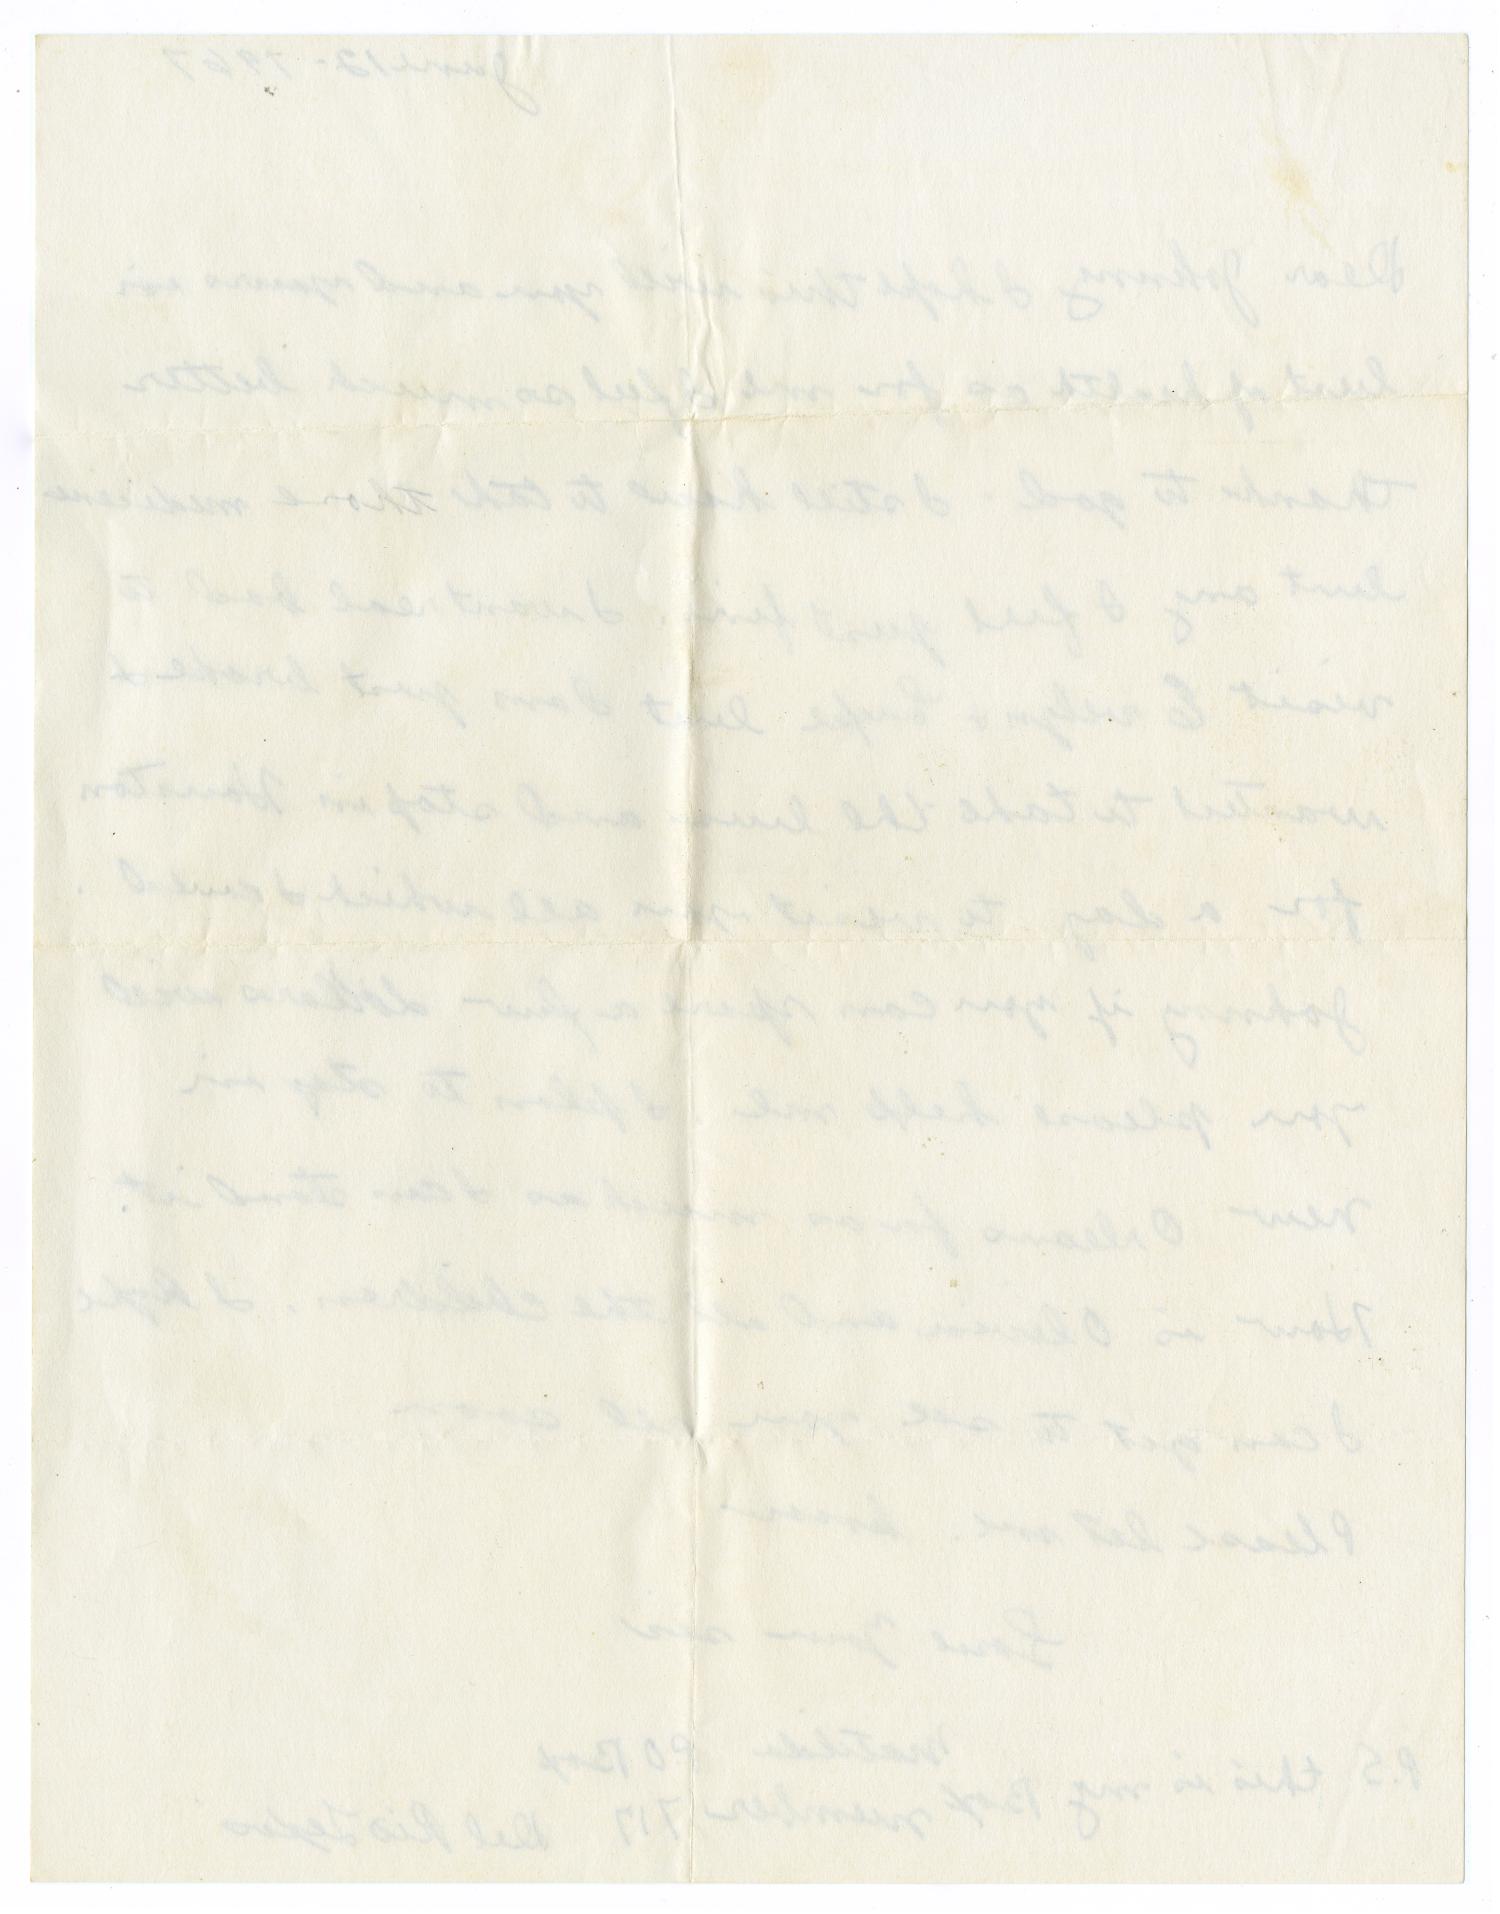 [Letter from Matilda Gonzales to John Herrera - 1967-06-12]
                                                
                                                    [Sequence #]: 2 of 4
                                                